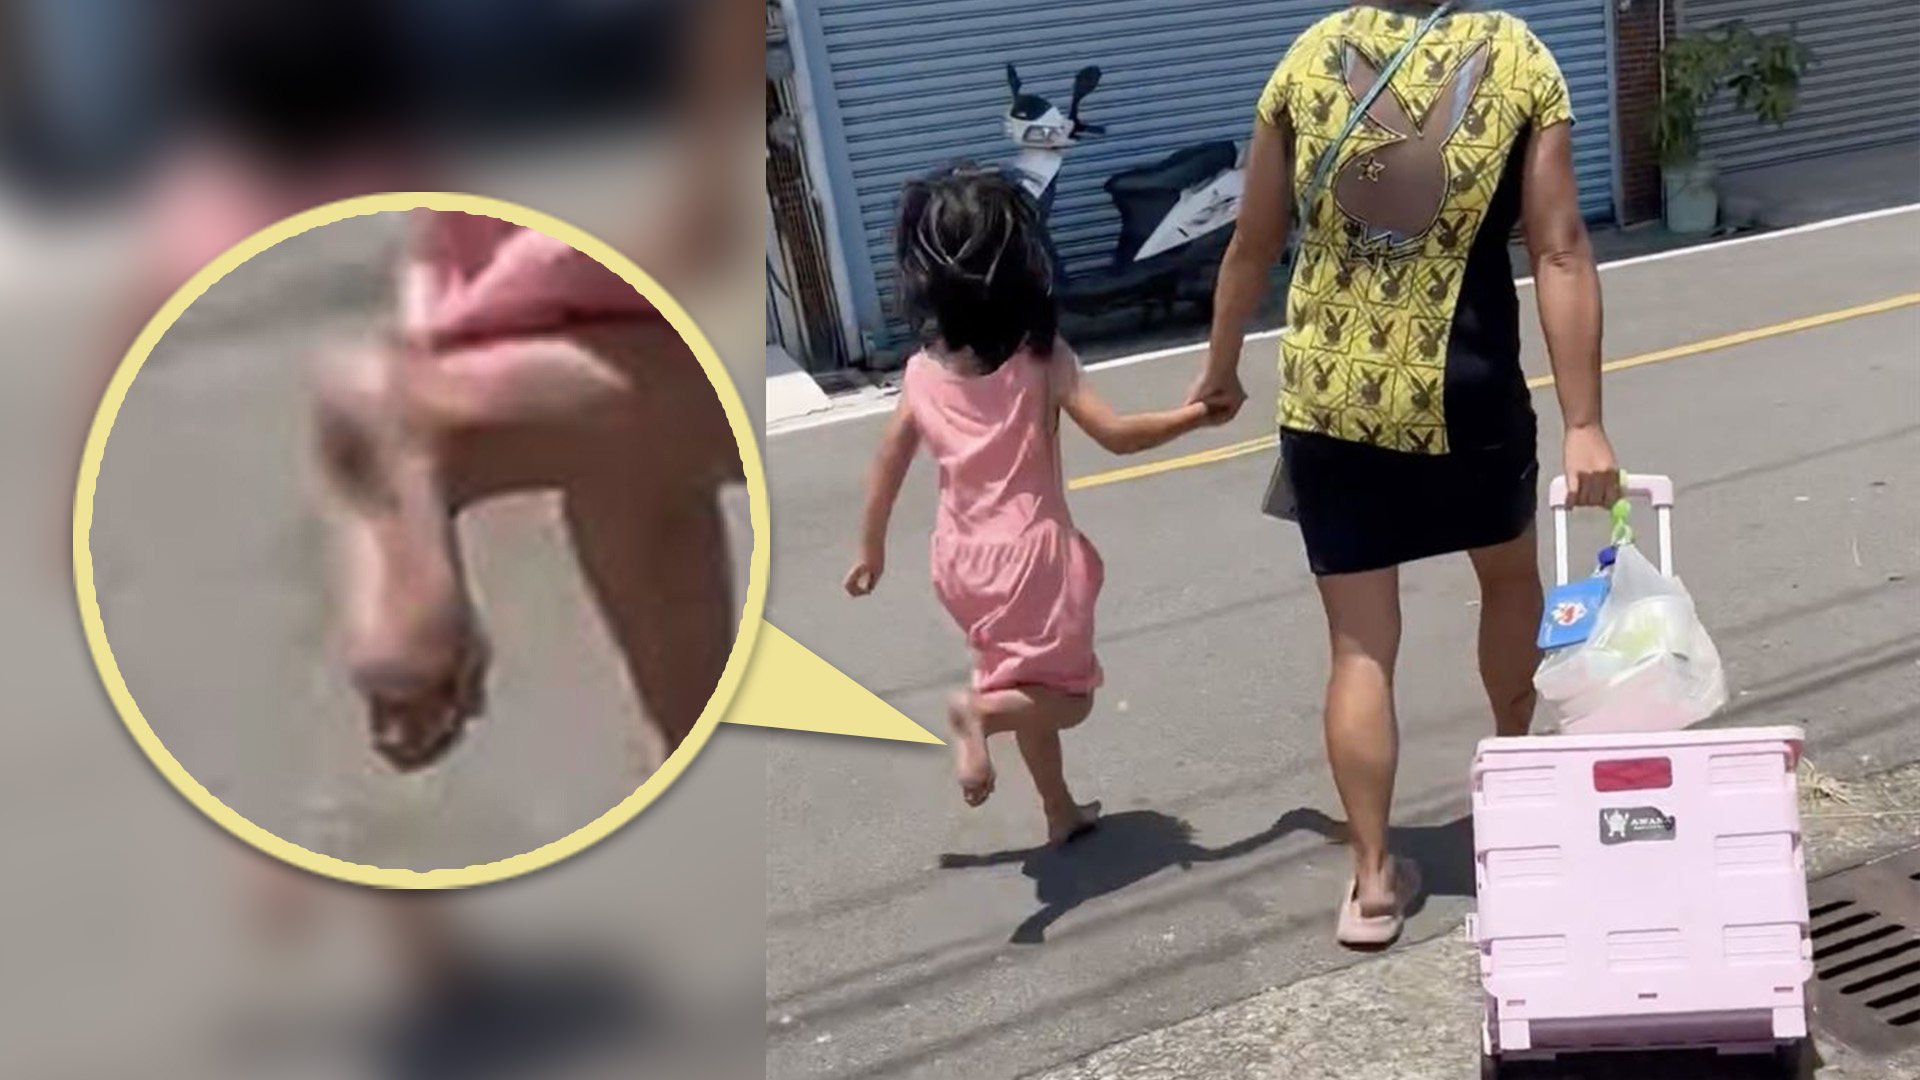 A mother in Taiwan is facing fierce criticism online after she made her young daughter walk barefoot on a searing hot pavement as punishment for losing her shoes. Photo: SCMP composite/YouTube